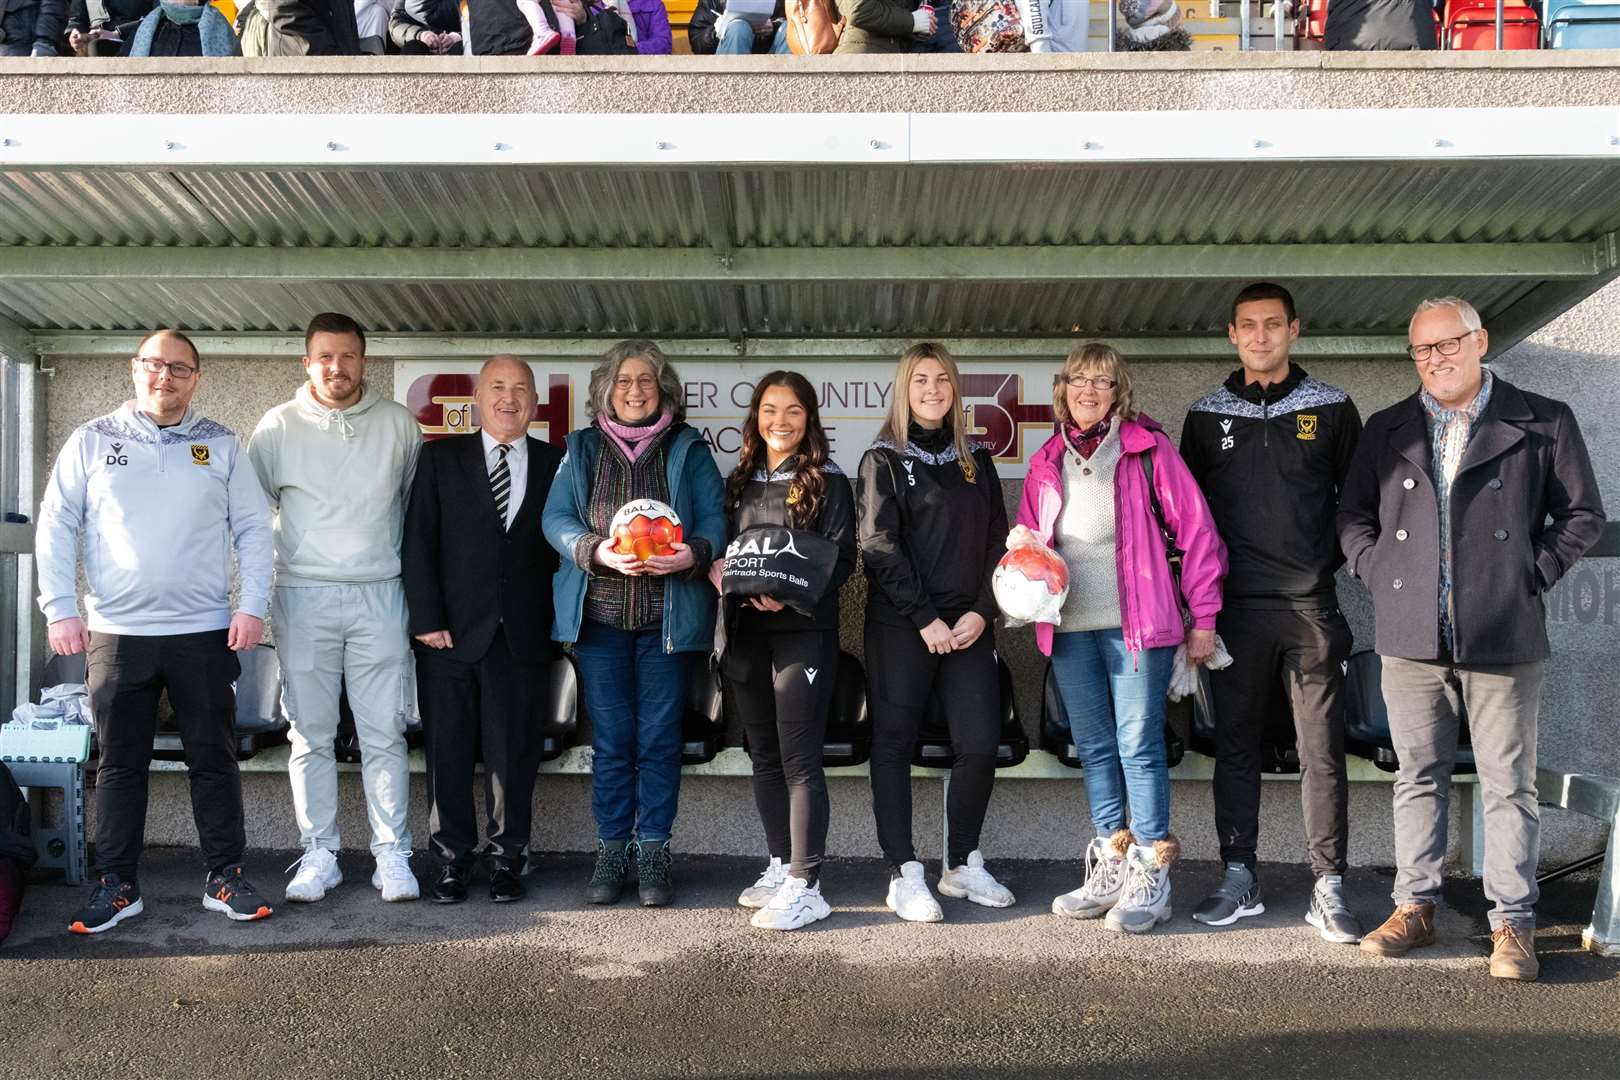 Huntly's Fairtrade Town group handing over Fairtrade footballs to the new Women's team at Christie Park in January. Picture: Beth Taylor